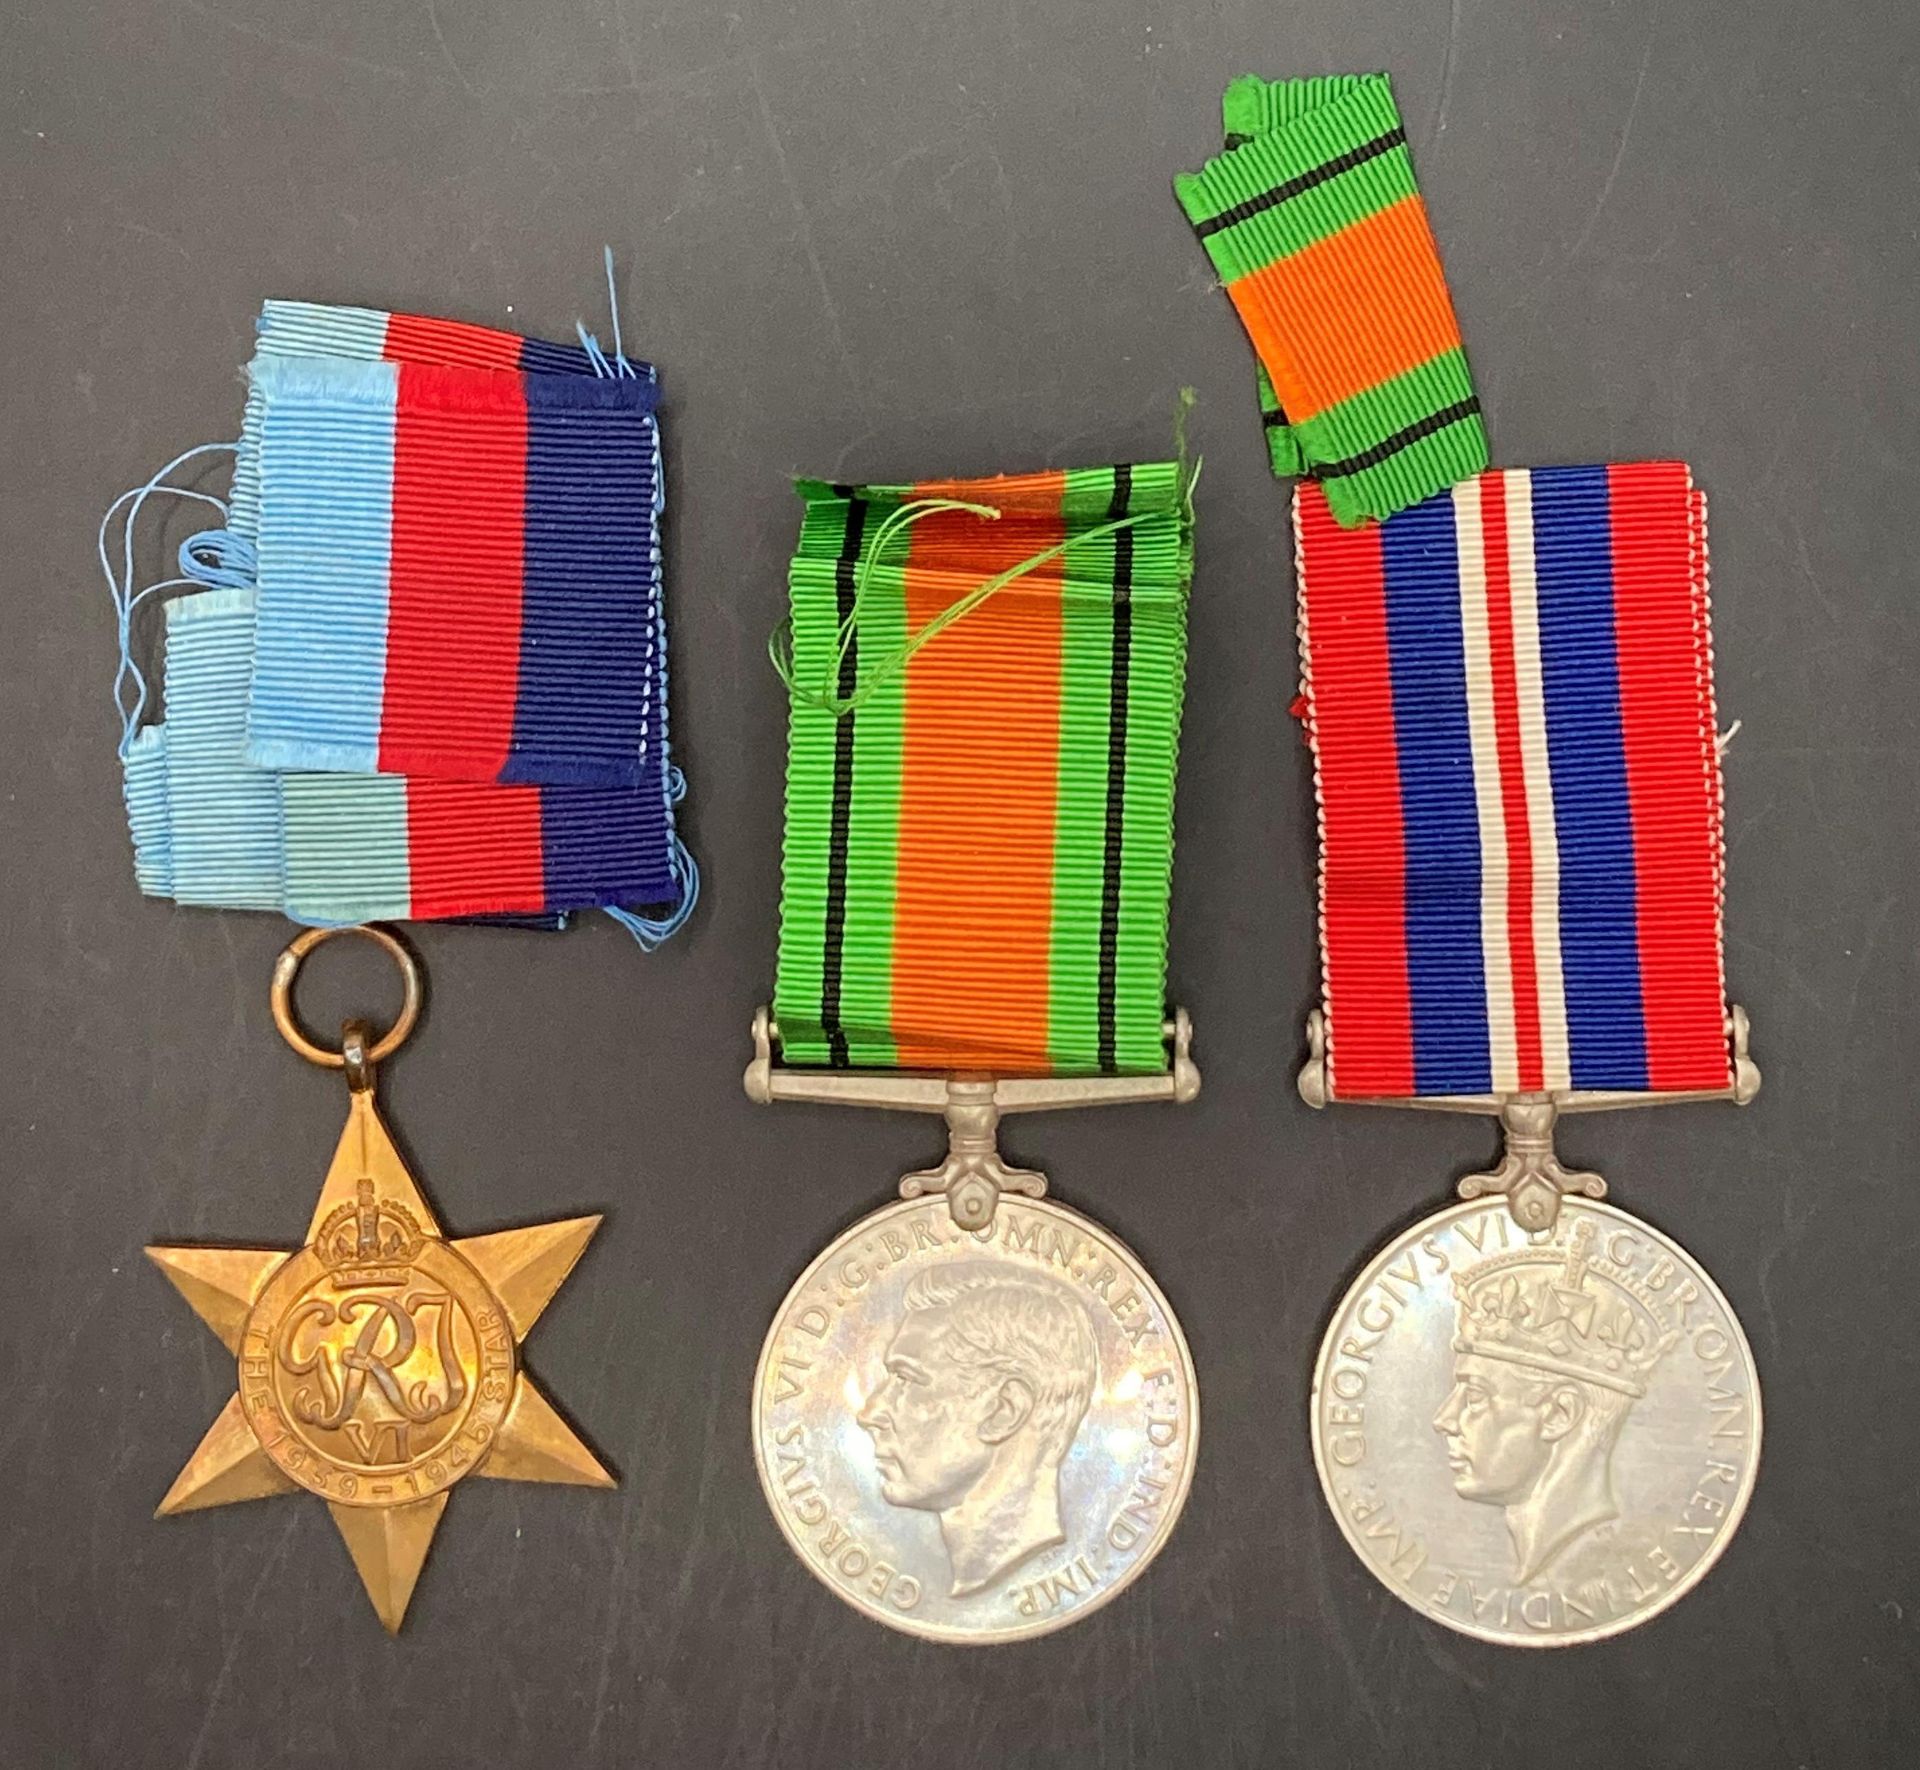 Three Second World War medals - 1939-1945 Defence Medal with ribbon,